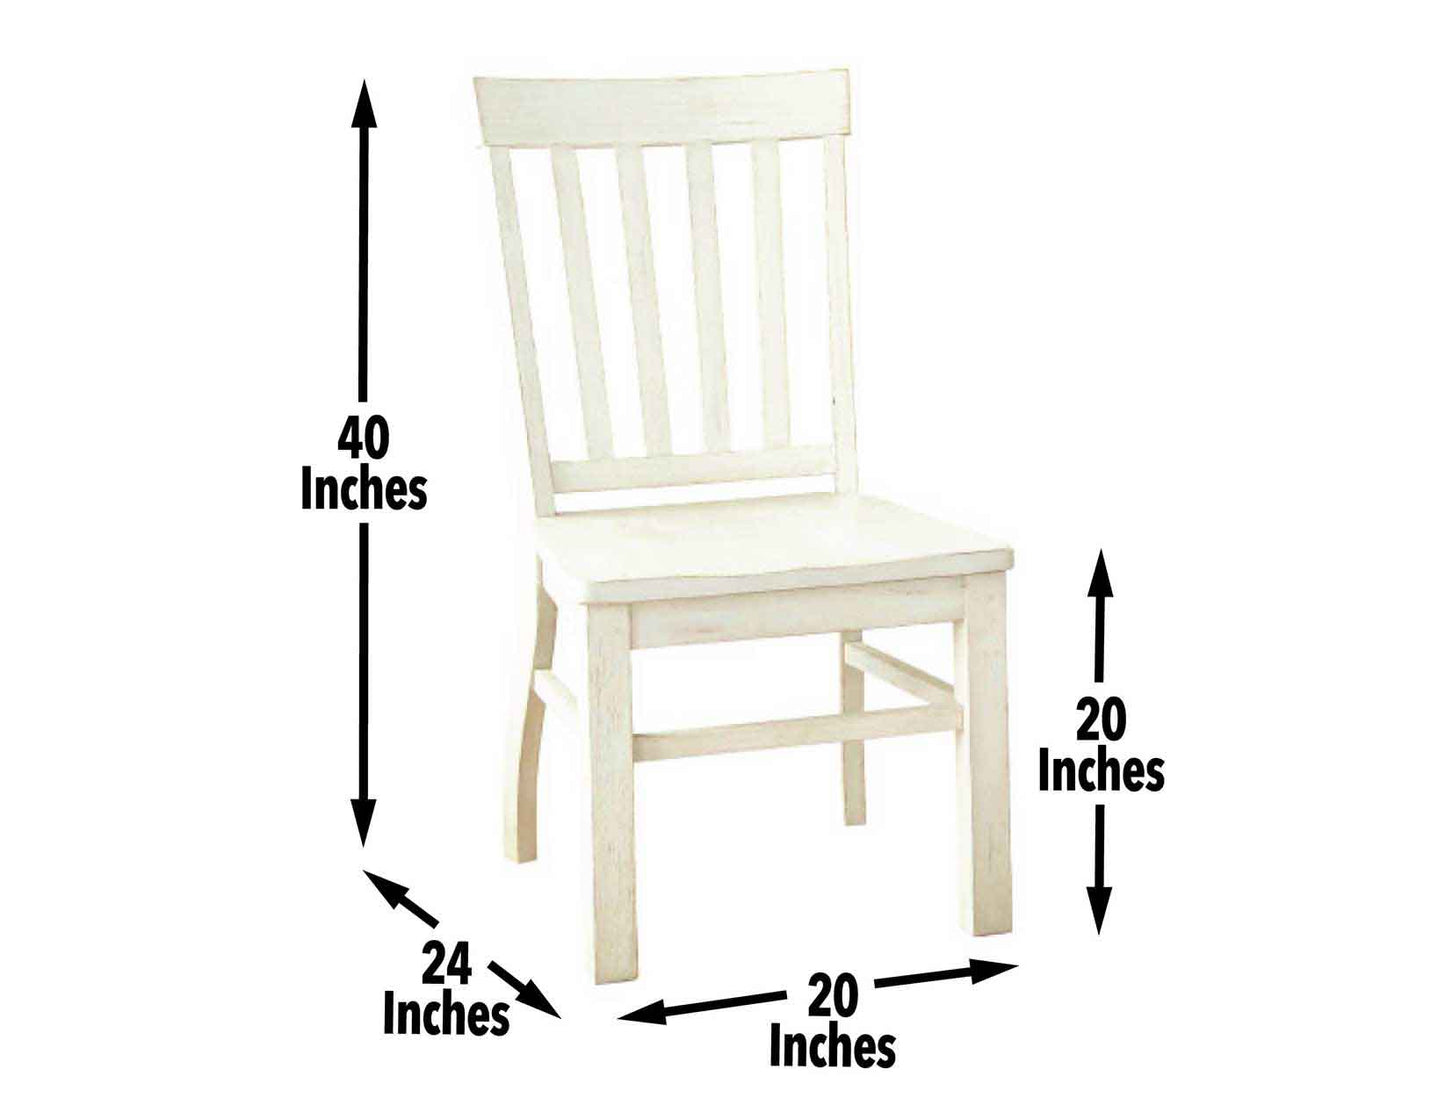 Cayla White Dining Chairs (includes 2 chairs) by Steve Silver